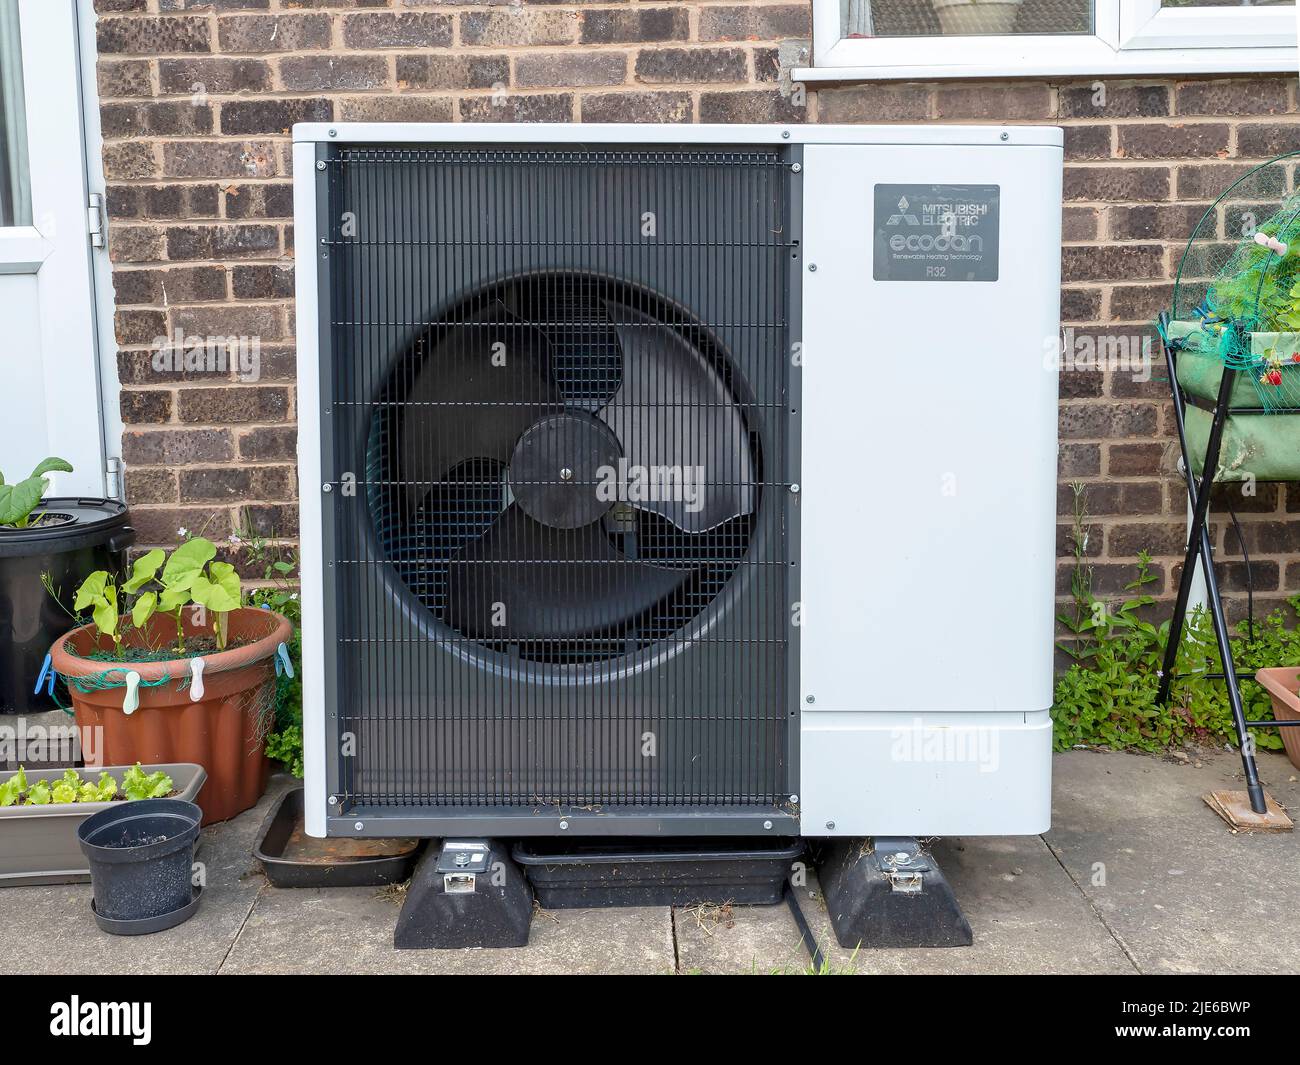 Mitsubishi Ecodan heat pump in a garden in front of a brick house wall Stock Photo